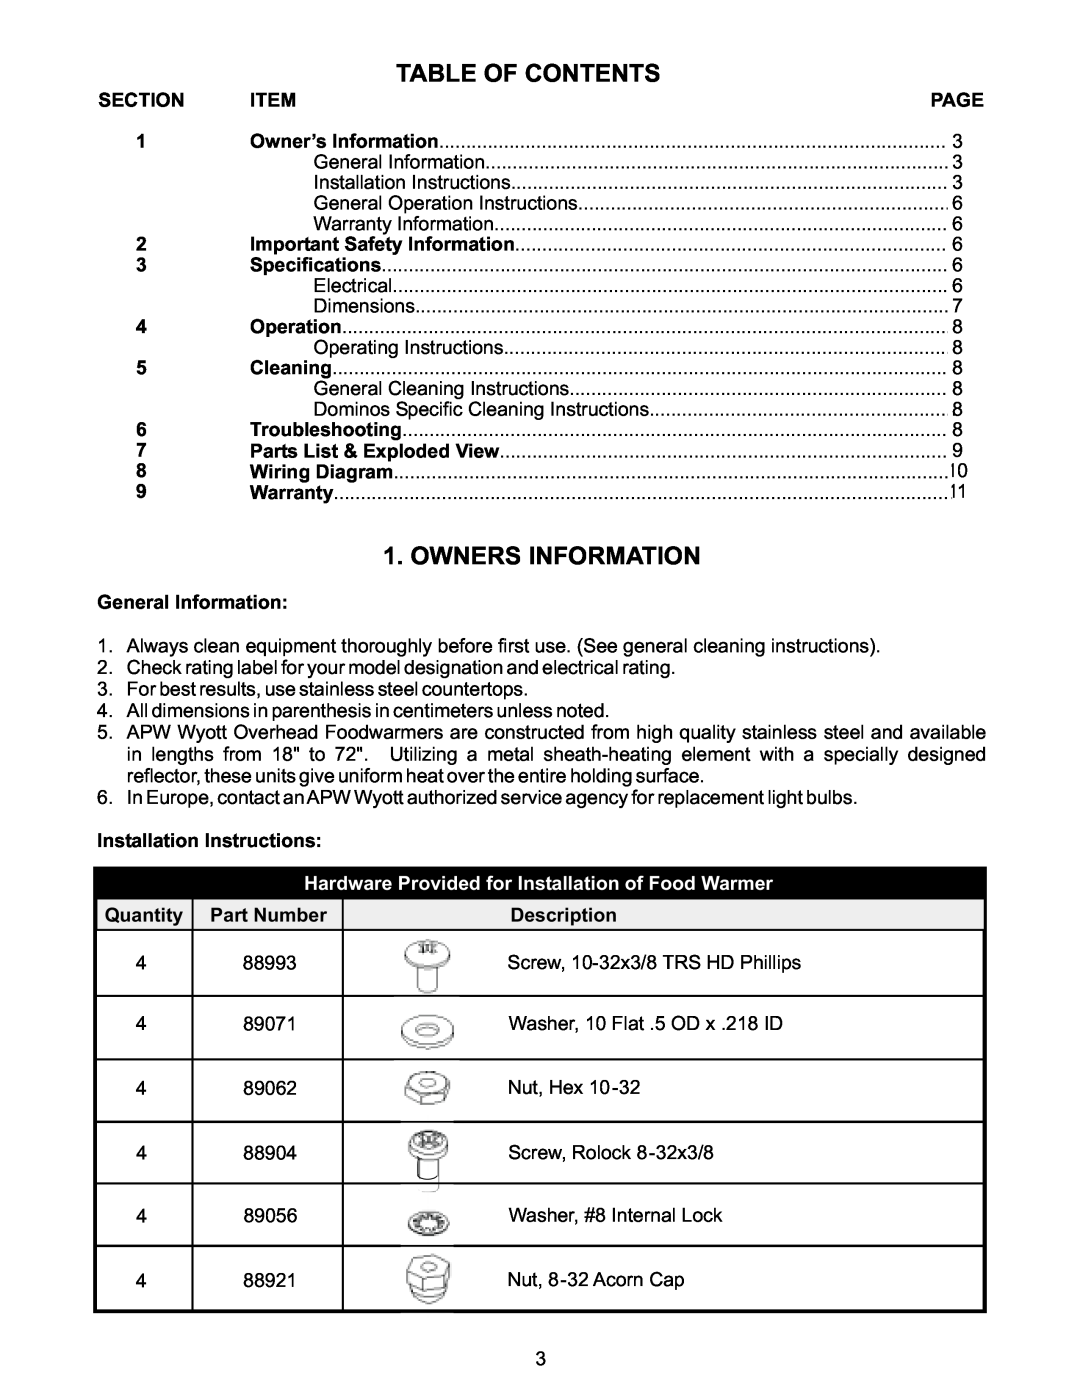 APW FD Table Of Contents, Owners Information, Page, General Information, Installation Instructions, Quantity Part Number 